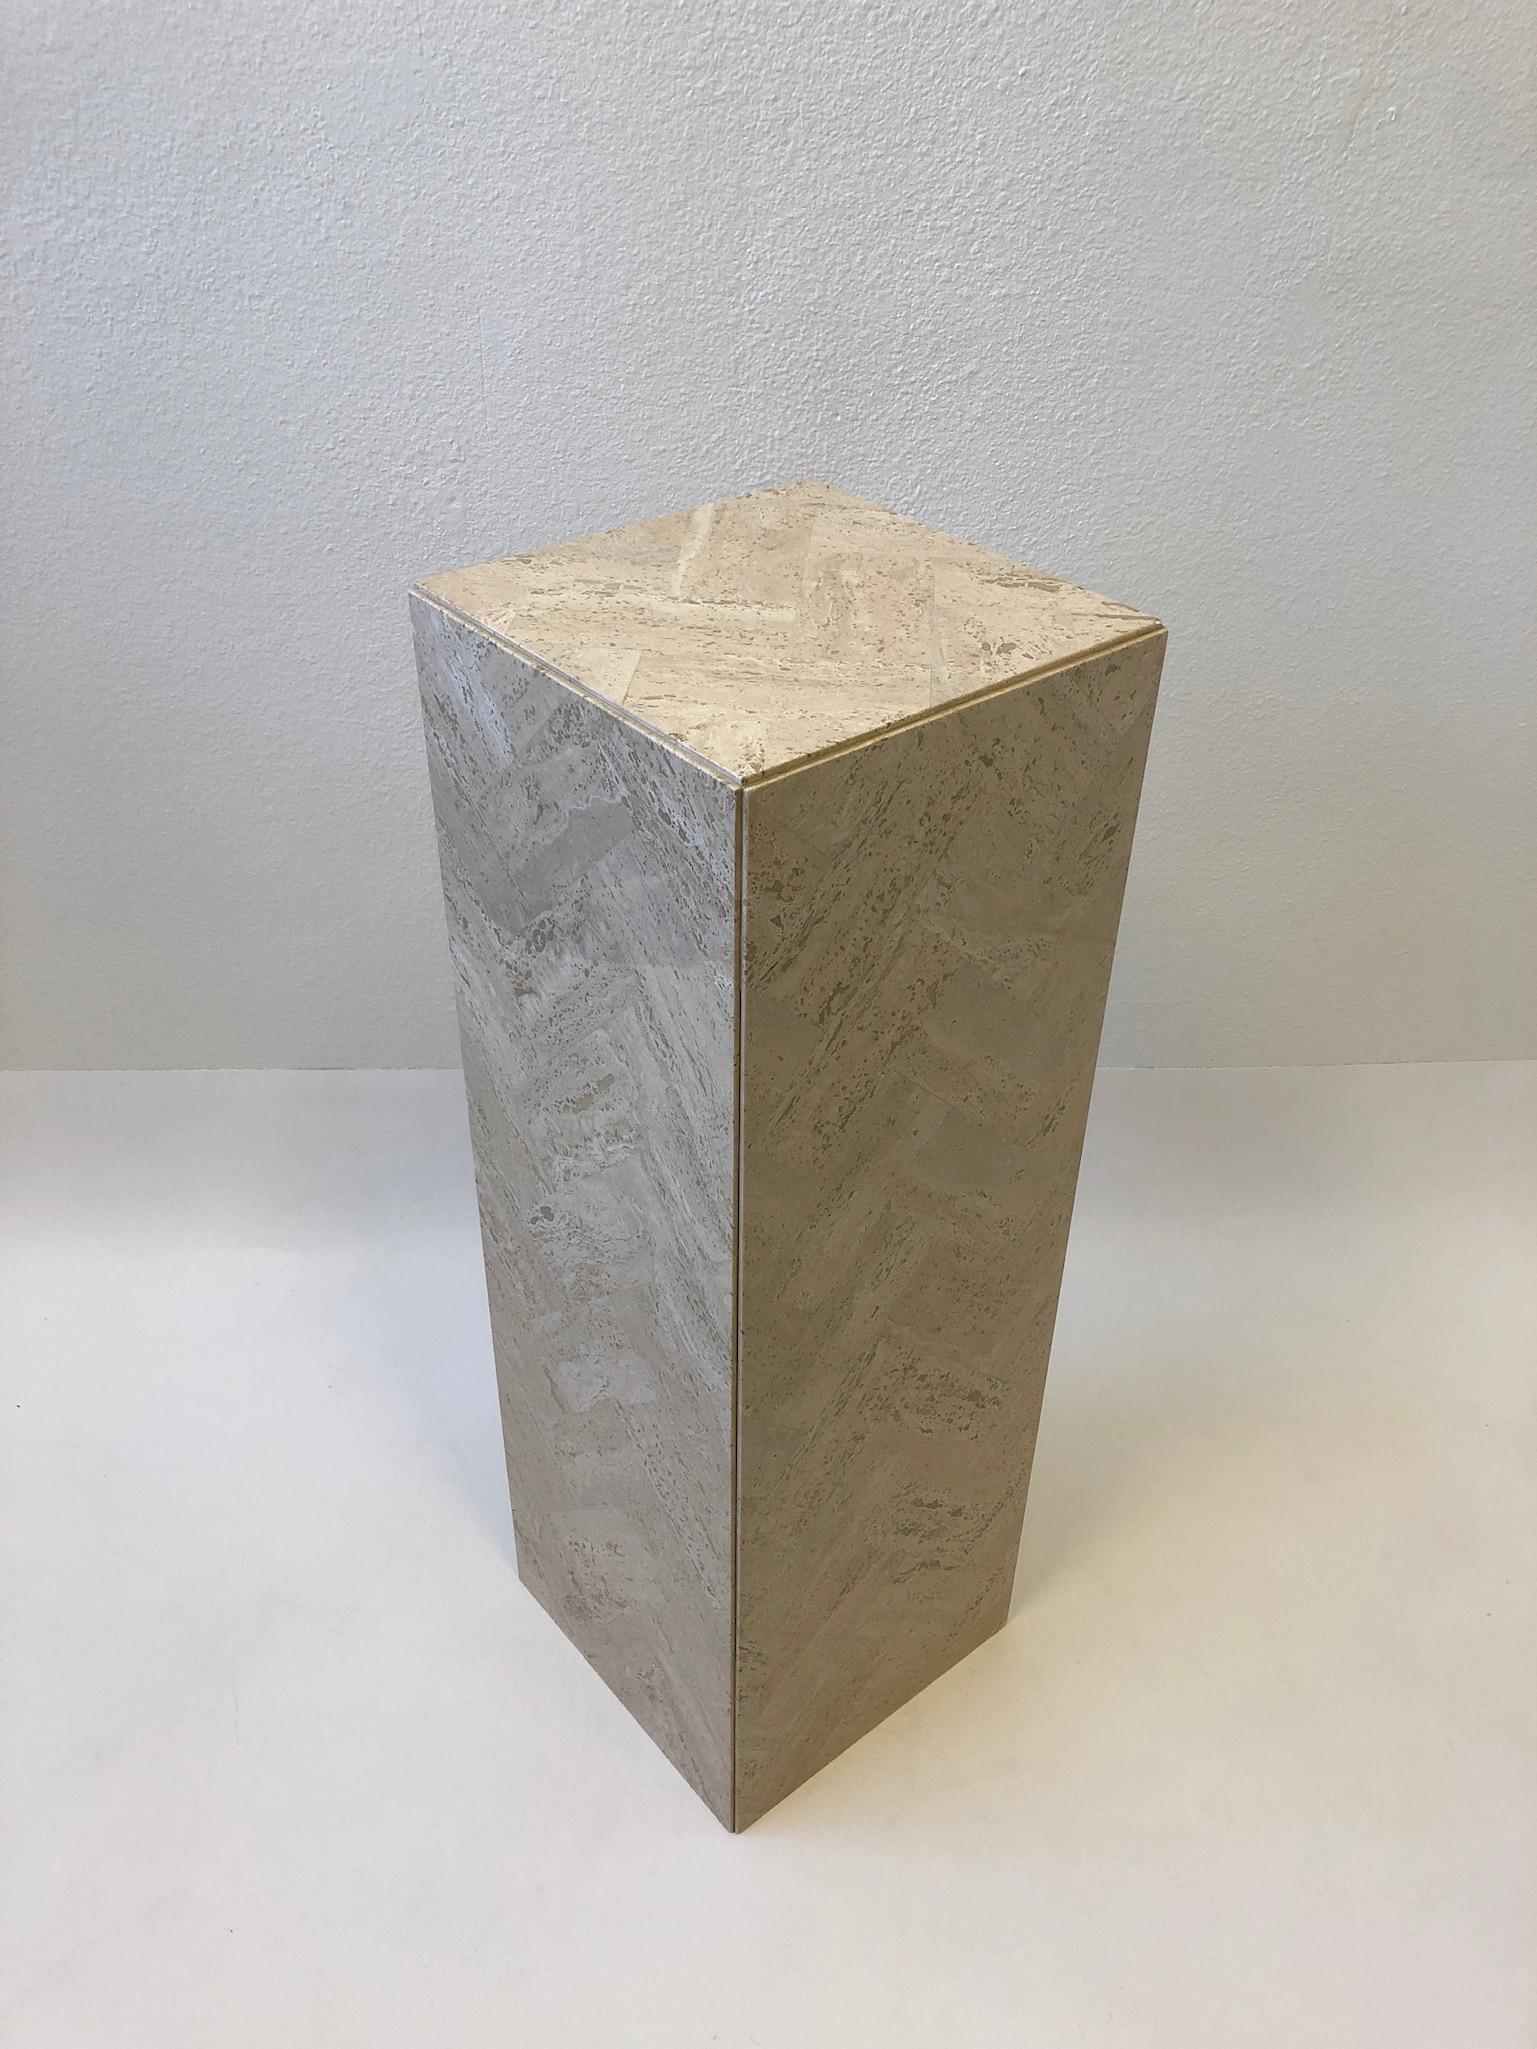 A glamorous Italian travertine pedestal from the 1970s. The pedestal is constructed of tessellated travertine in a herringbone pattern. 
Measurements: 36” high, 12” wide, 12” deep.